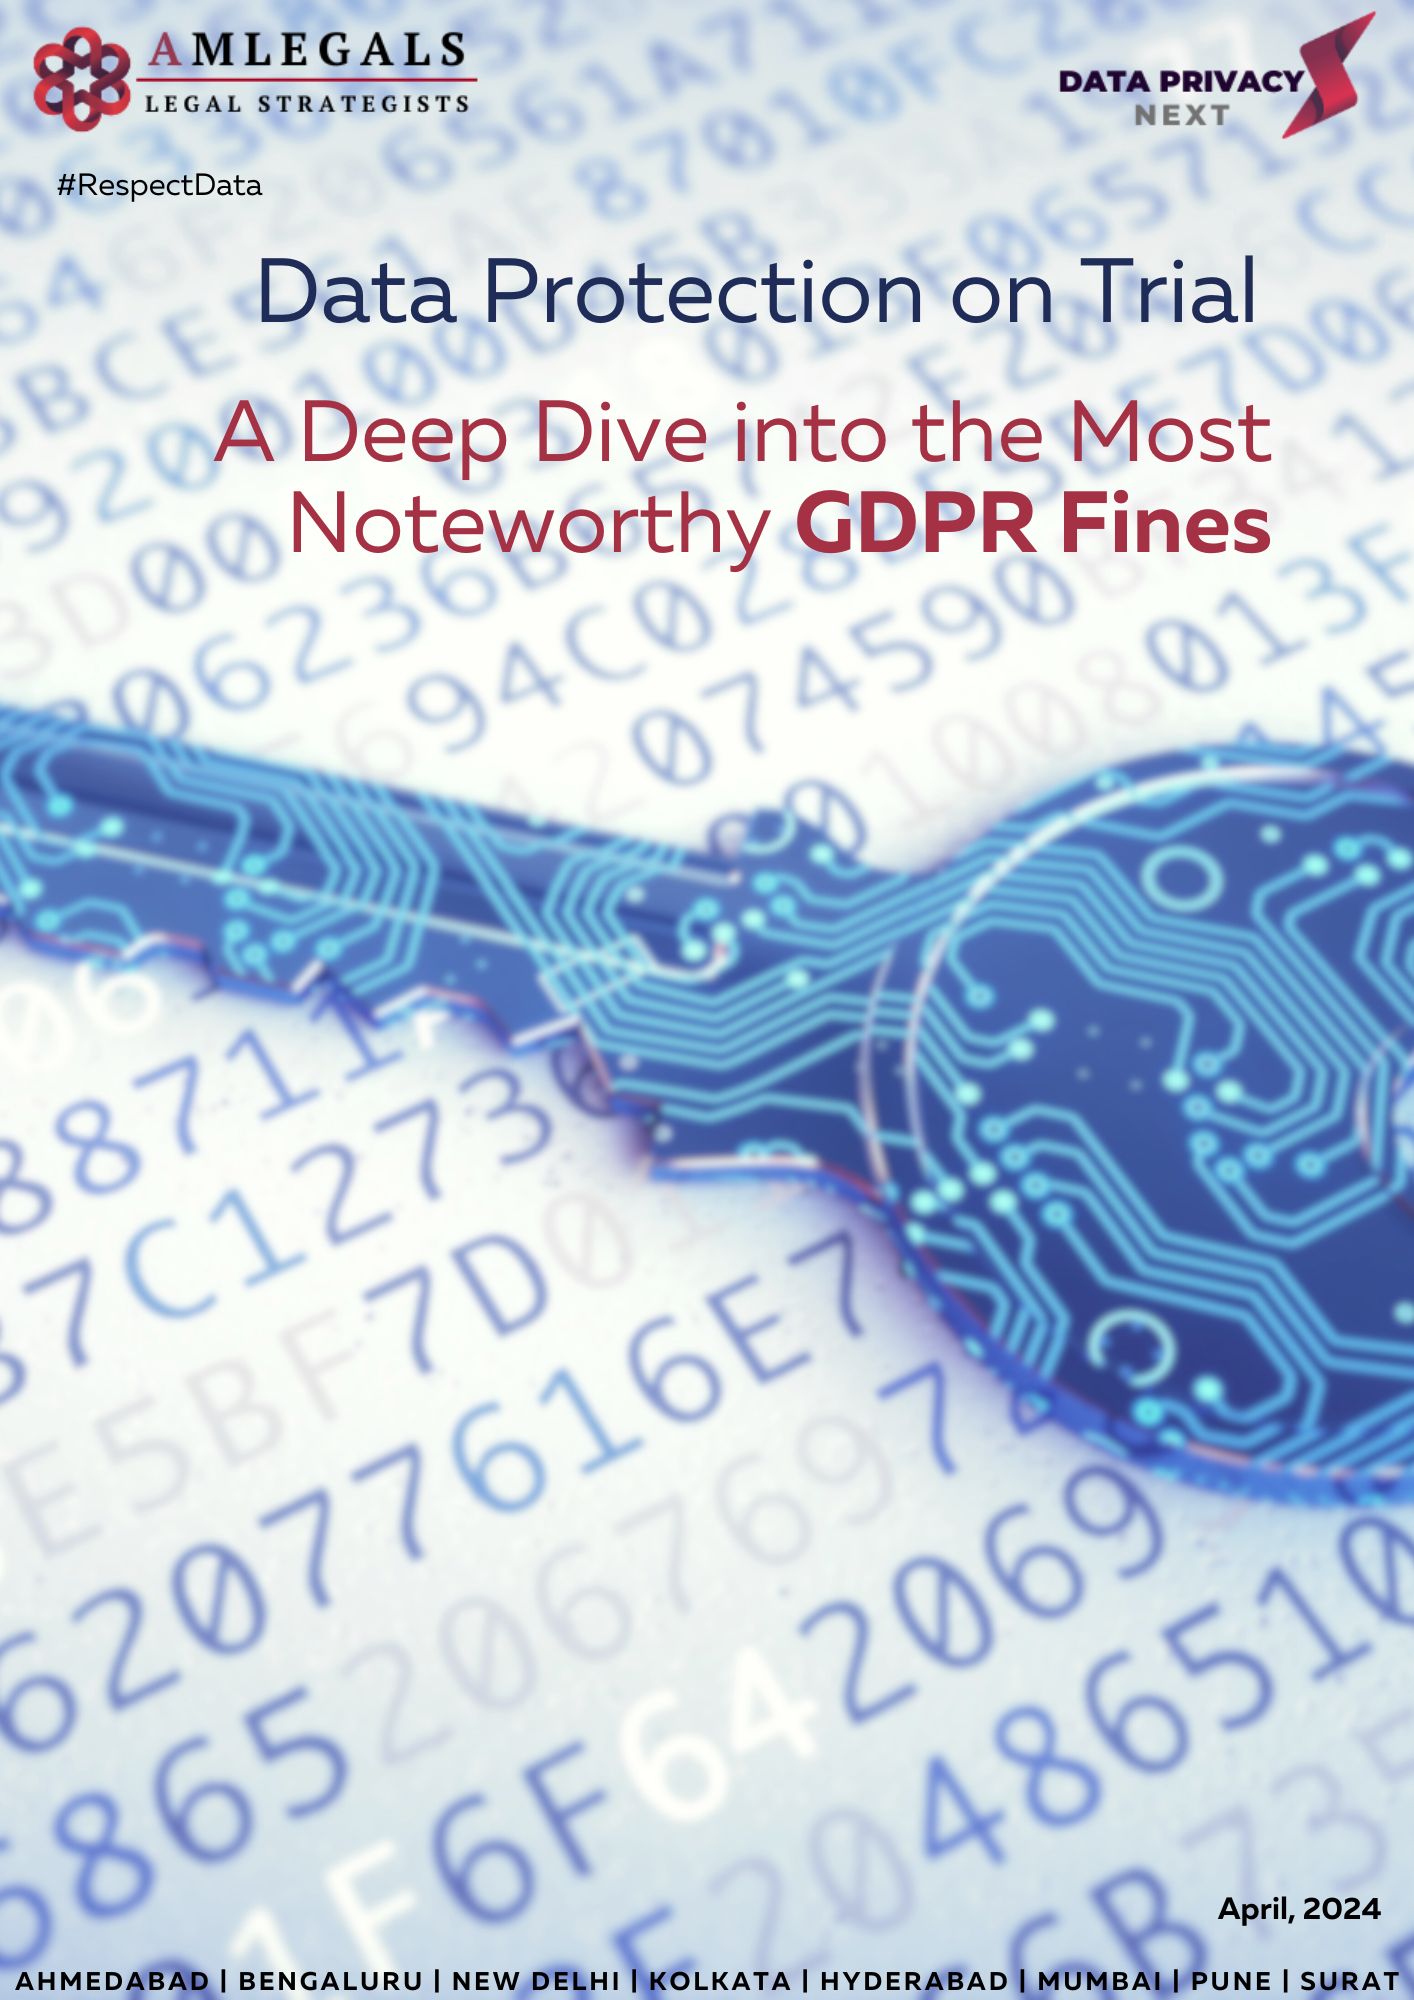 Data Protection on Trial - A Deep Dive into the Most Noteworthy GDPR Fines